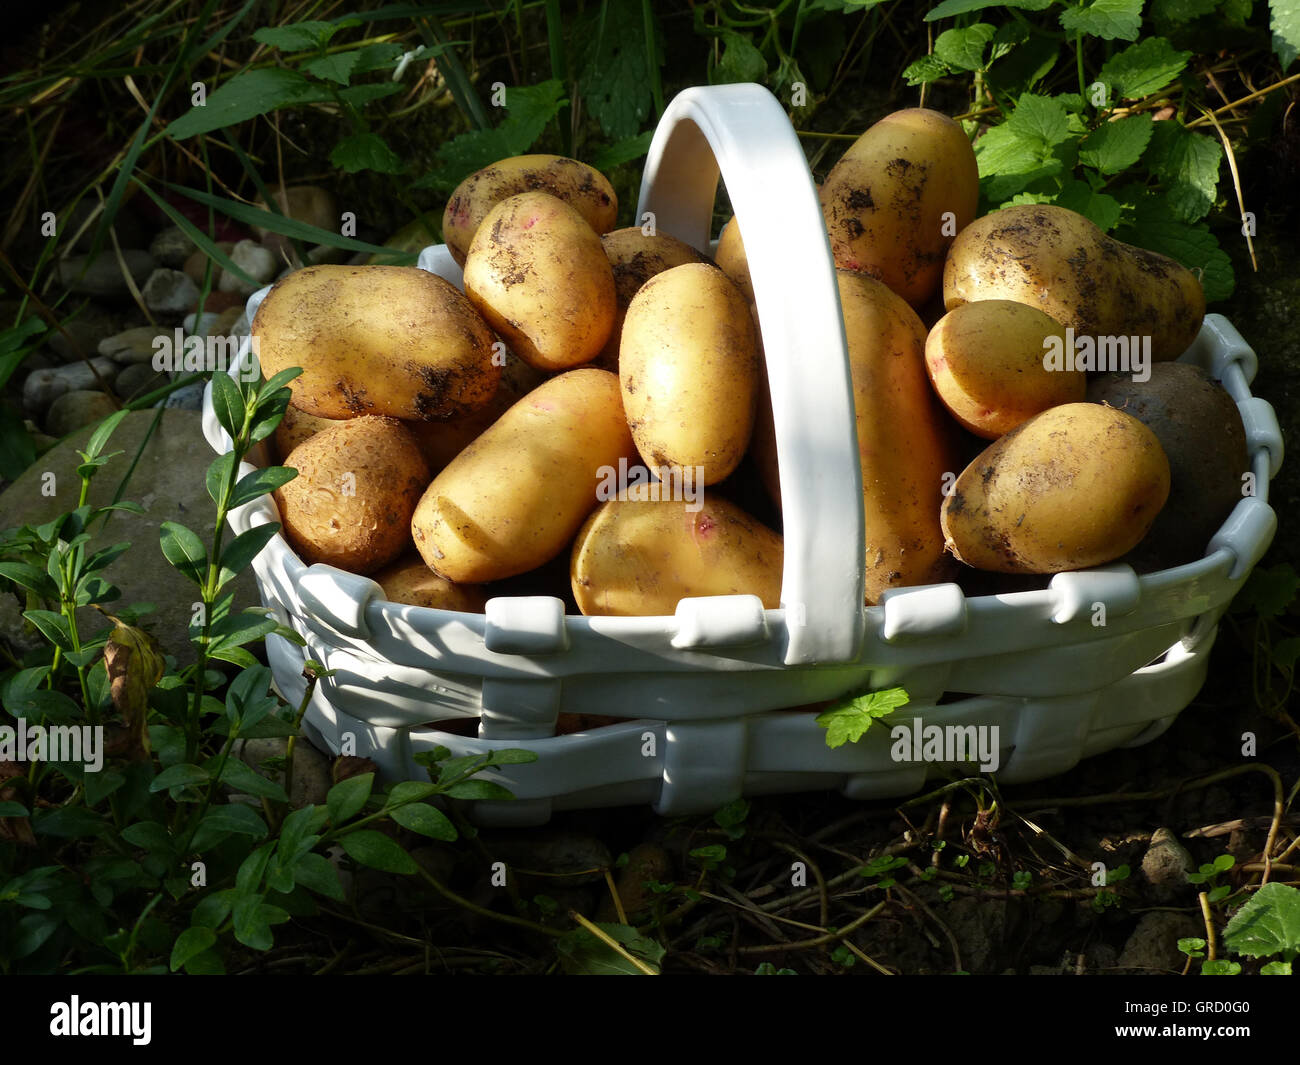 Just Harvested Potatoes From Organic Gardening In A Basket Stock Photo